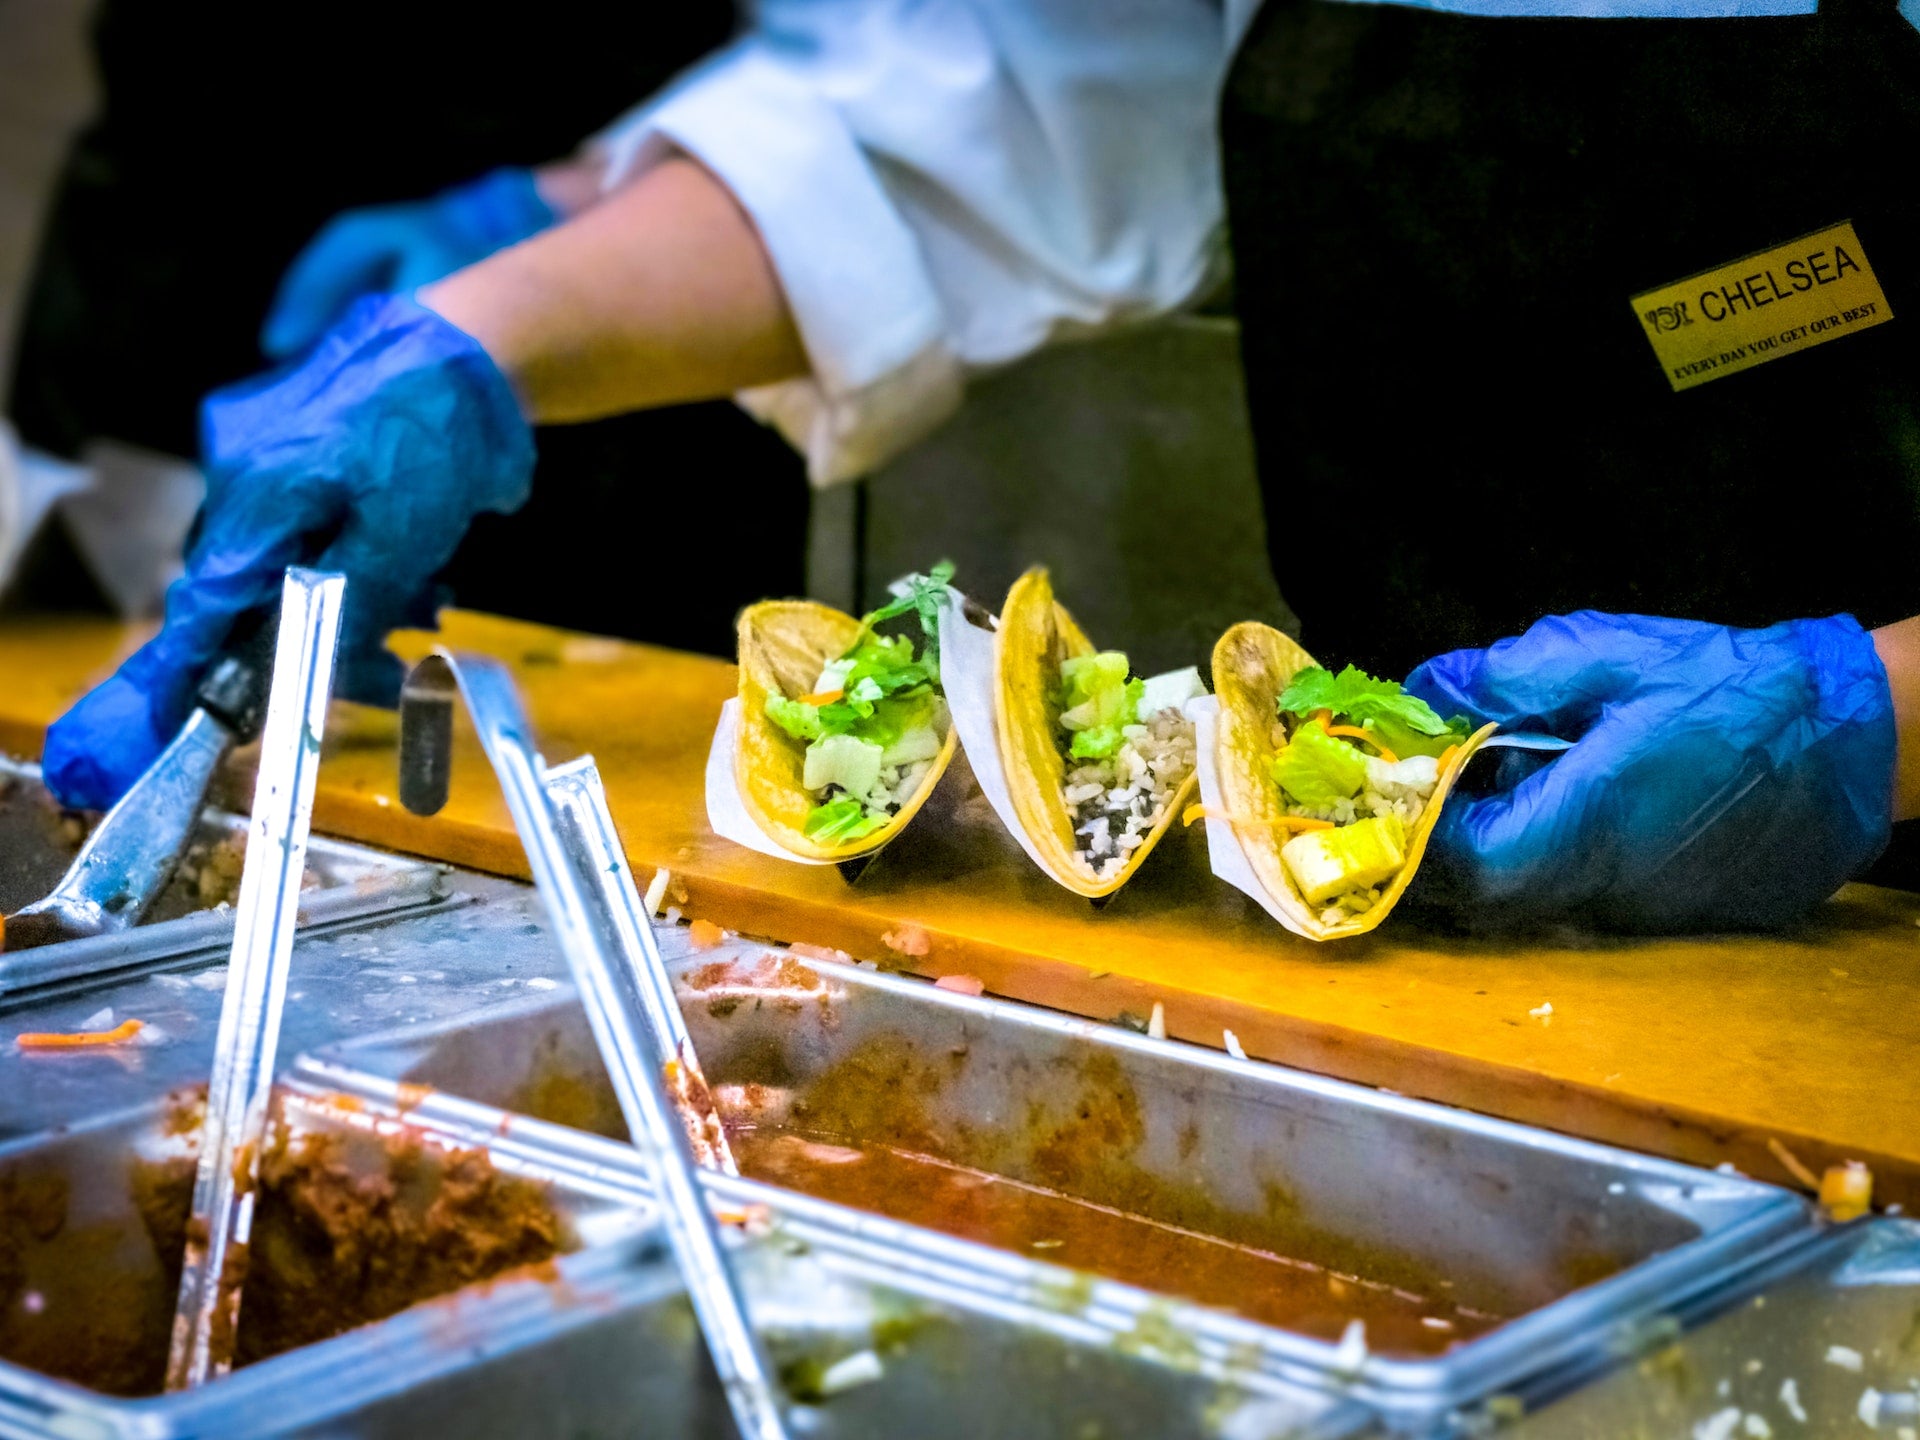 How to write a HACCP food plan for your food business